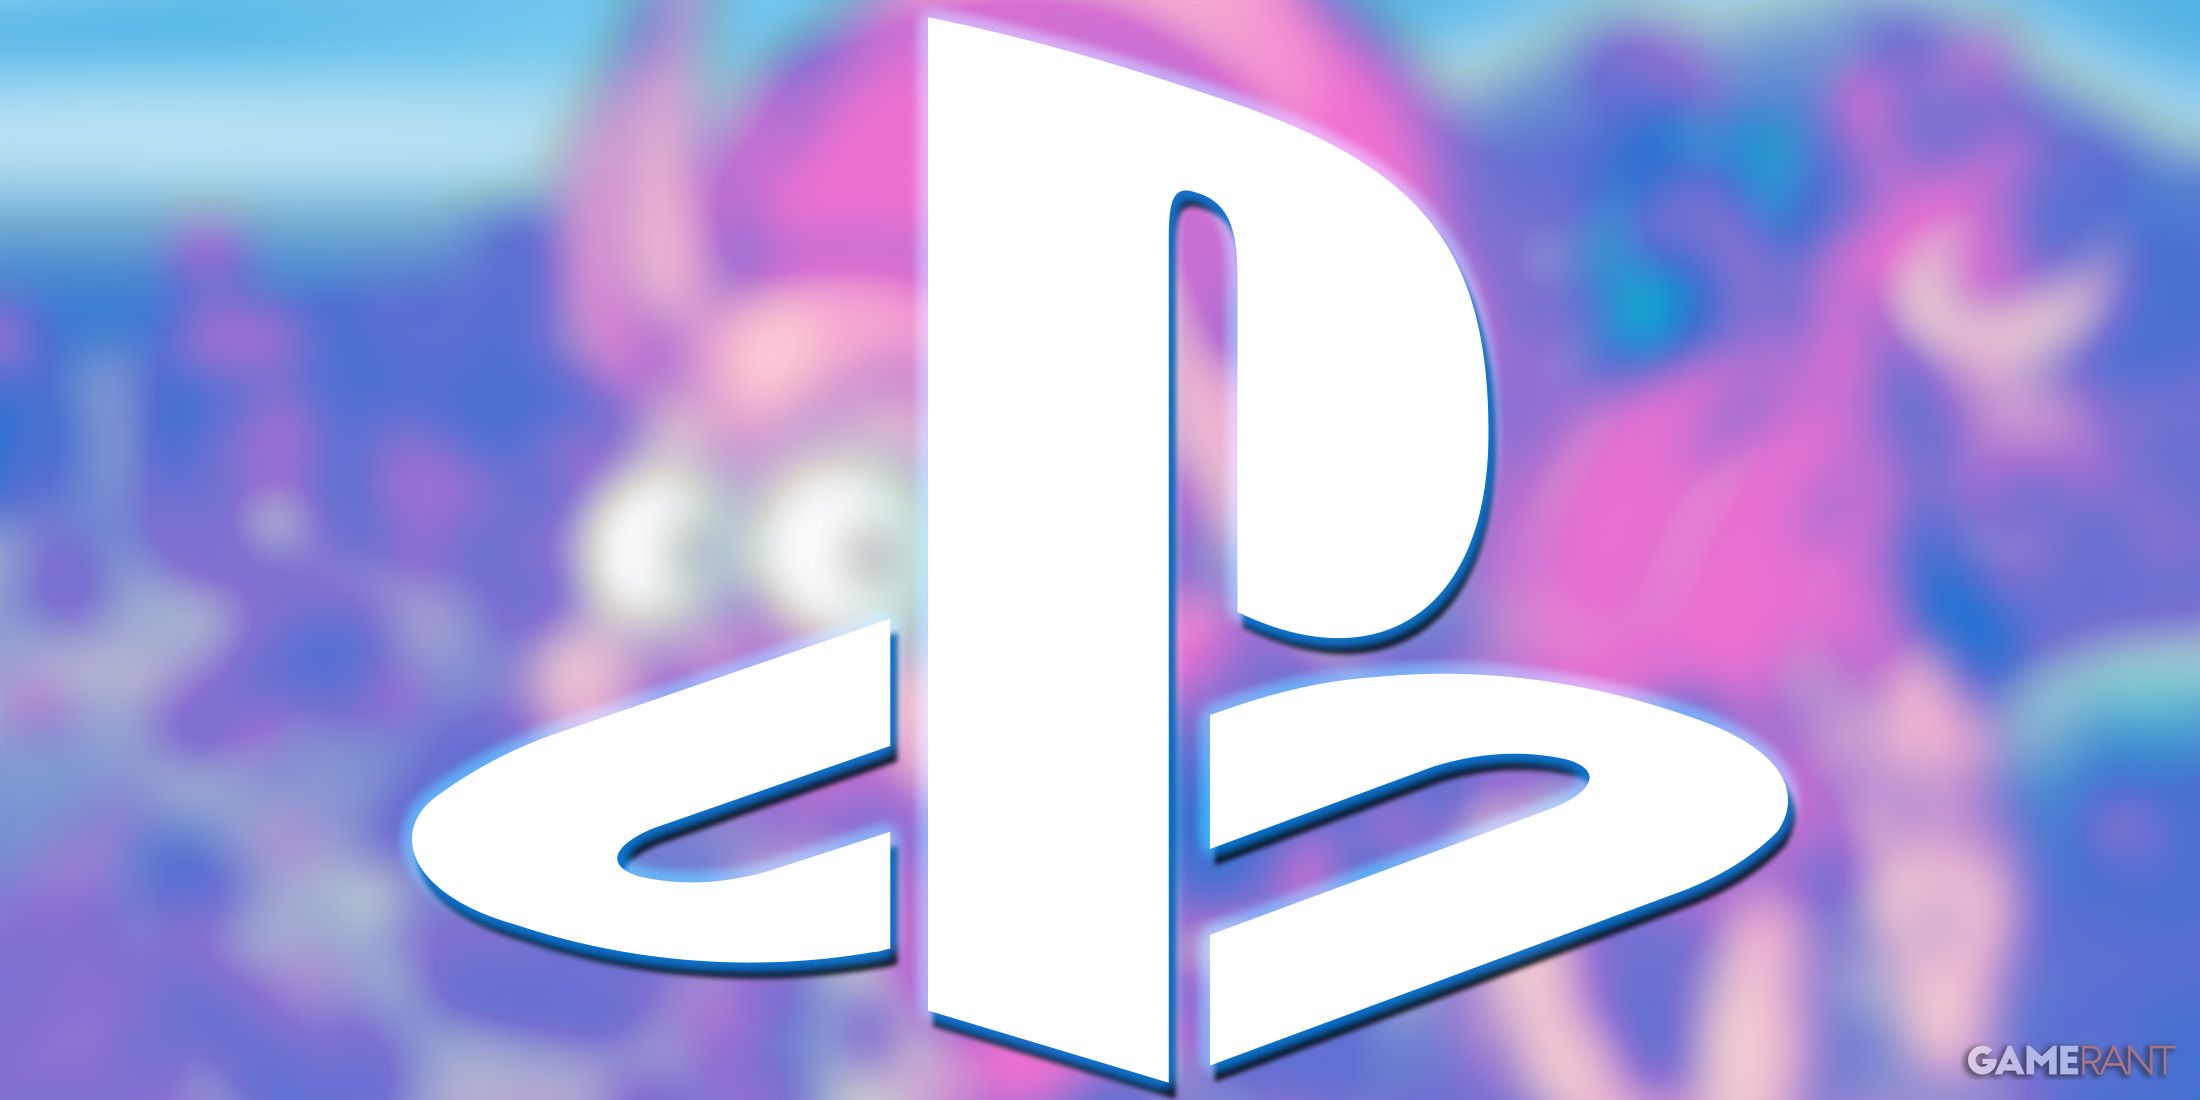 White PlayStation logo submark emblem with blue outer glow on blurred Tomba key art